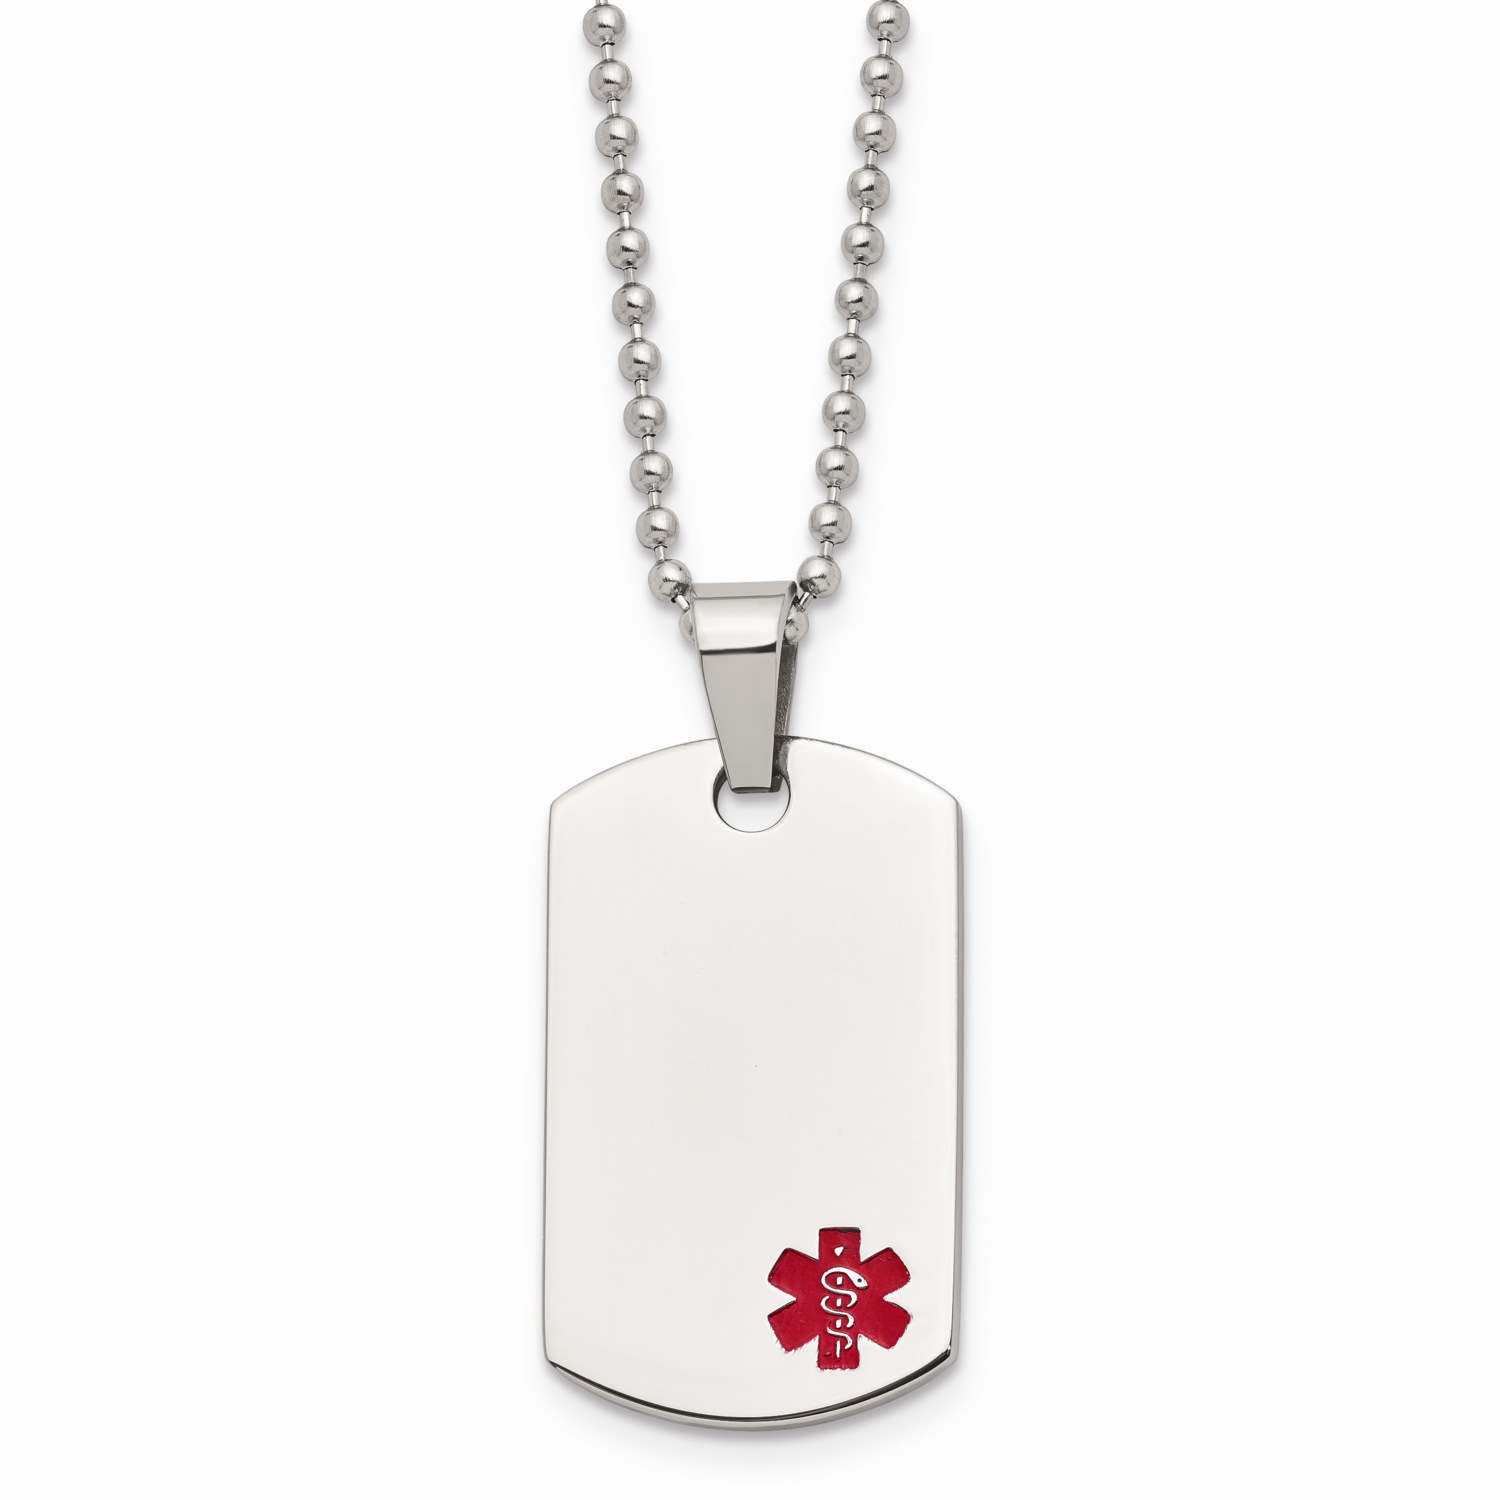 Small Dog Tag Medical Pendant Necklace Stainless Steel SRN900-24